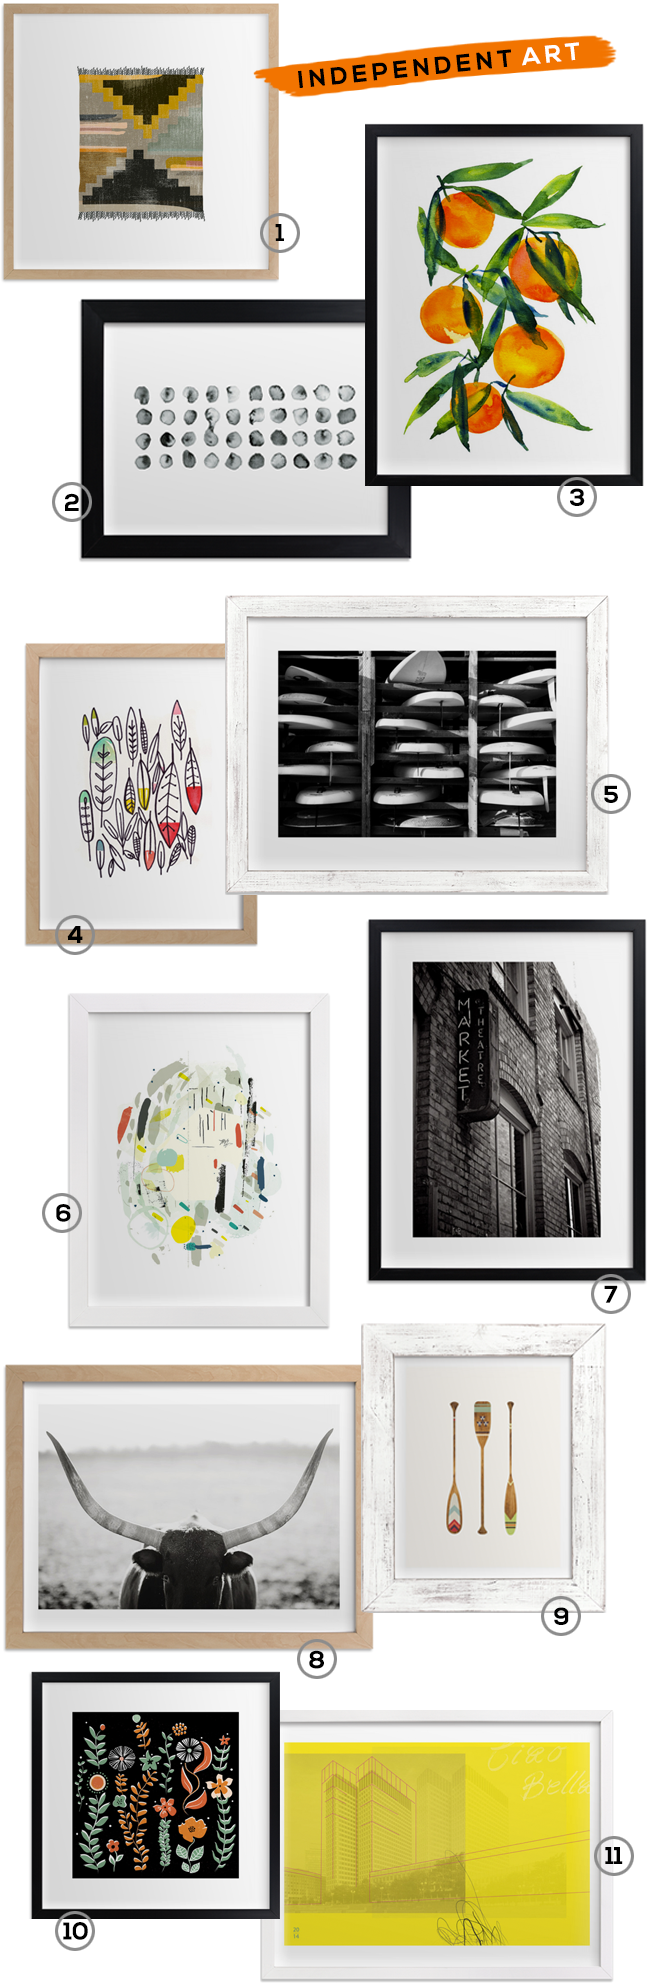 Independent Art Forever + a $500 Giveaway from Minted and Bubby & Bean!